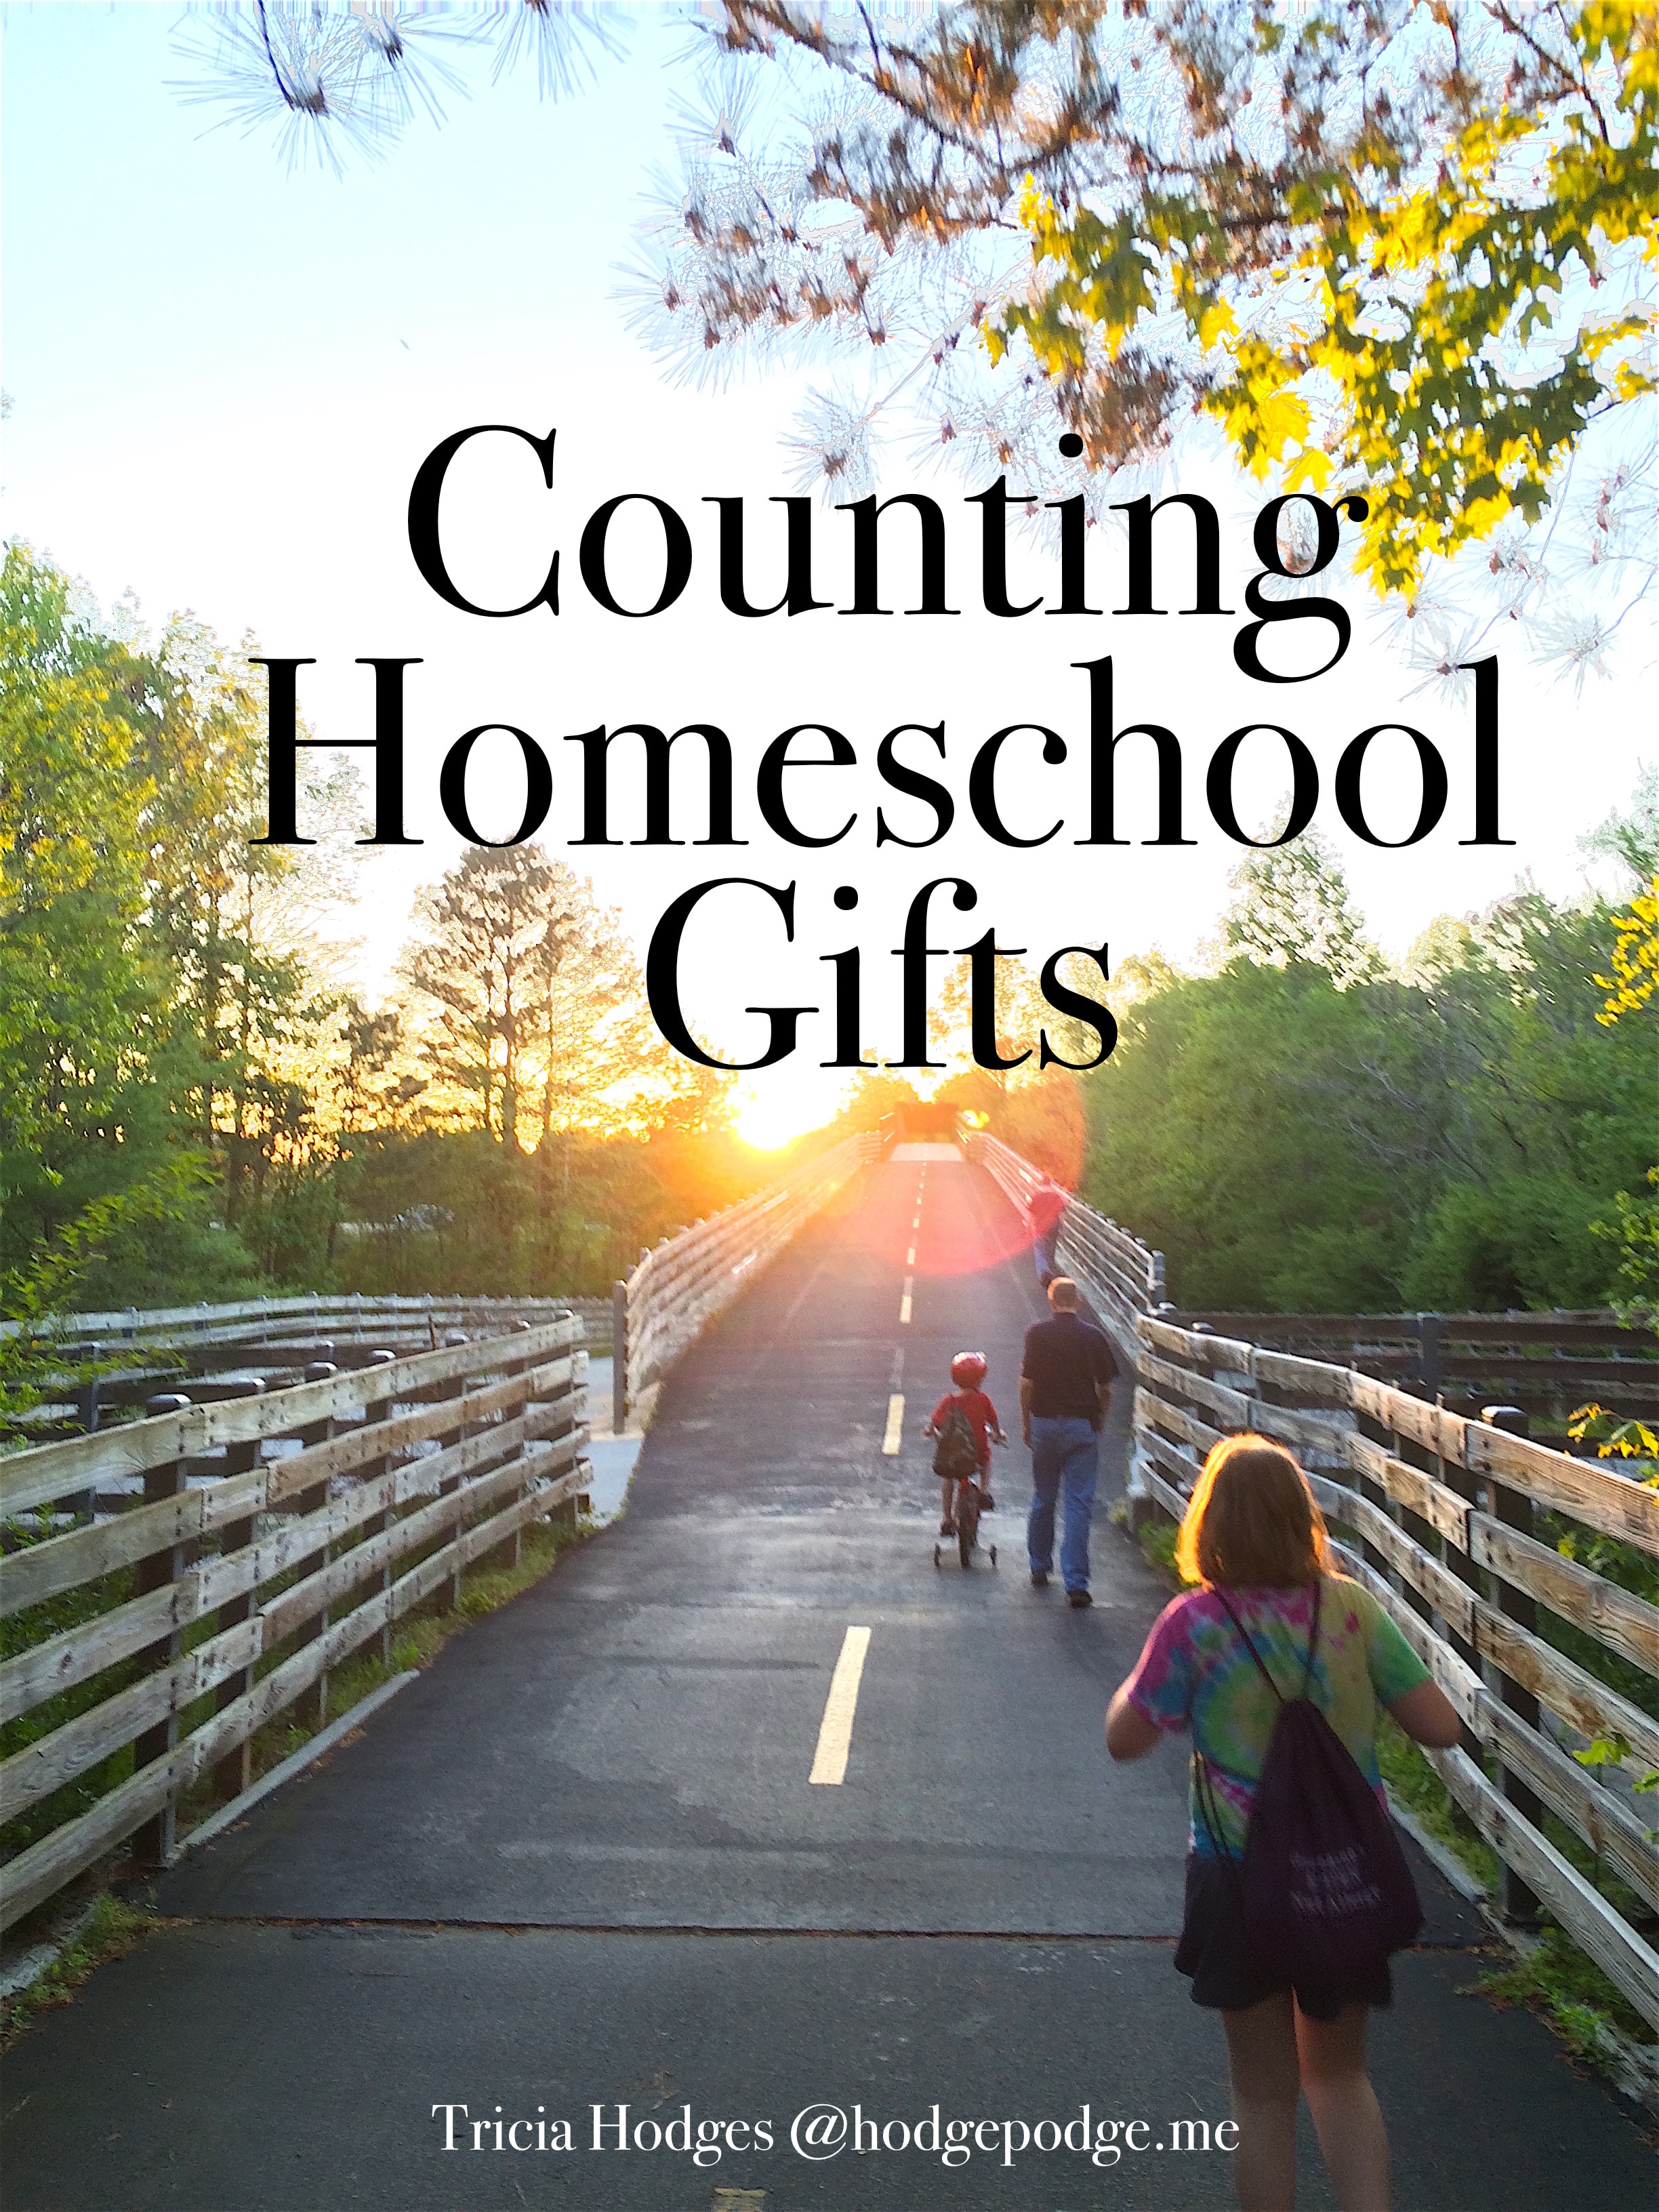 Counting Homeschool Gifts